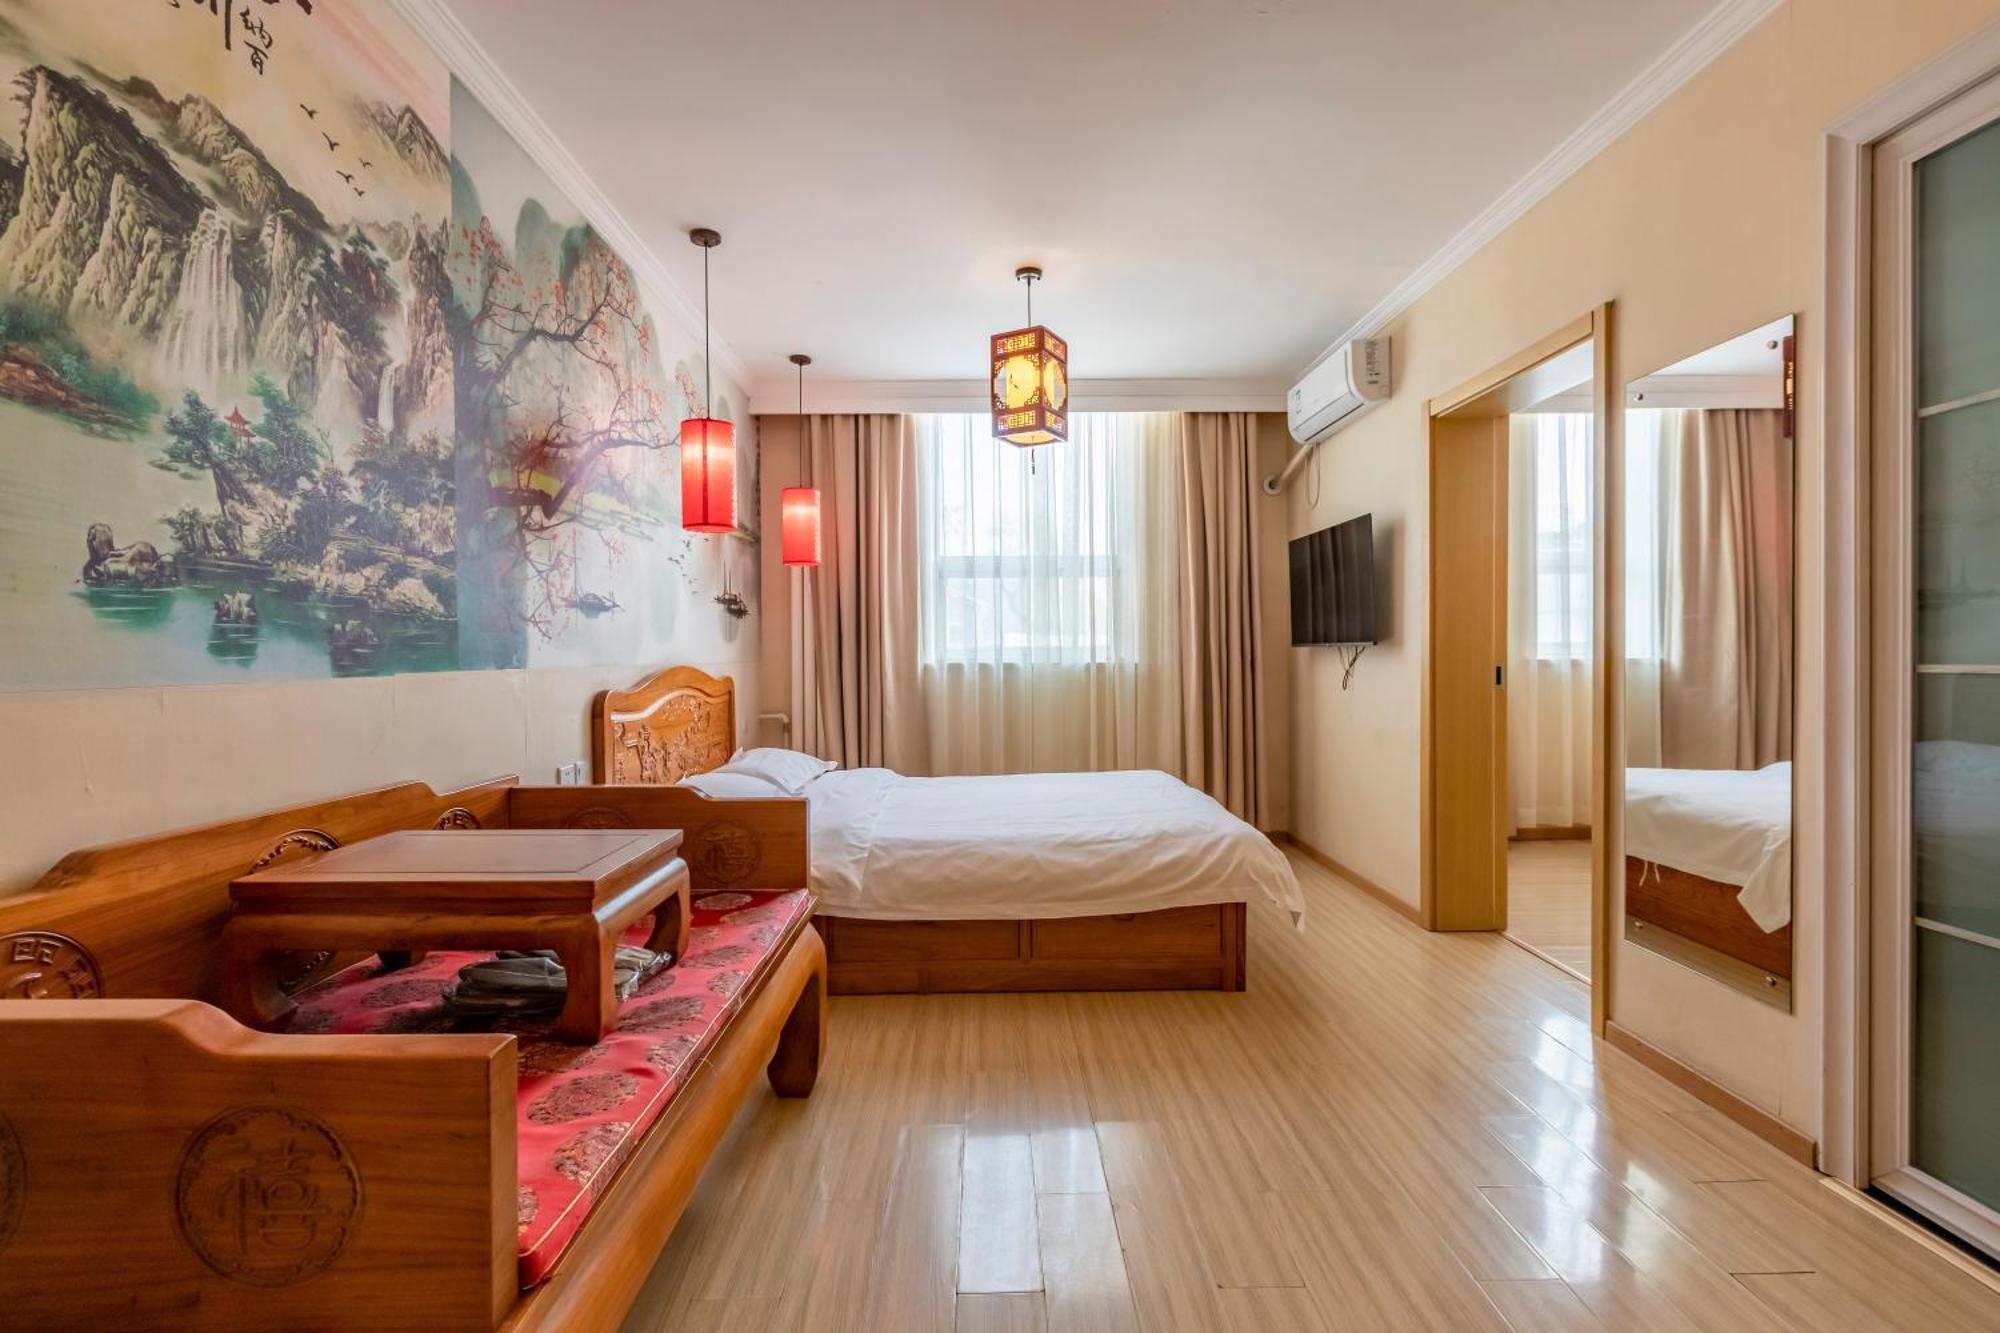 Happy Dragon City Center Alley Hotel -In The City Center With Big Window&Heater, Ticket Service&Free Coffee&Food Recommendation,Near Tian Anmen Forbiddencity,Easy To Get Traditional Walking Area&Shichahai Beijing Exterior photo